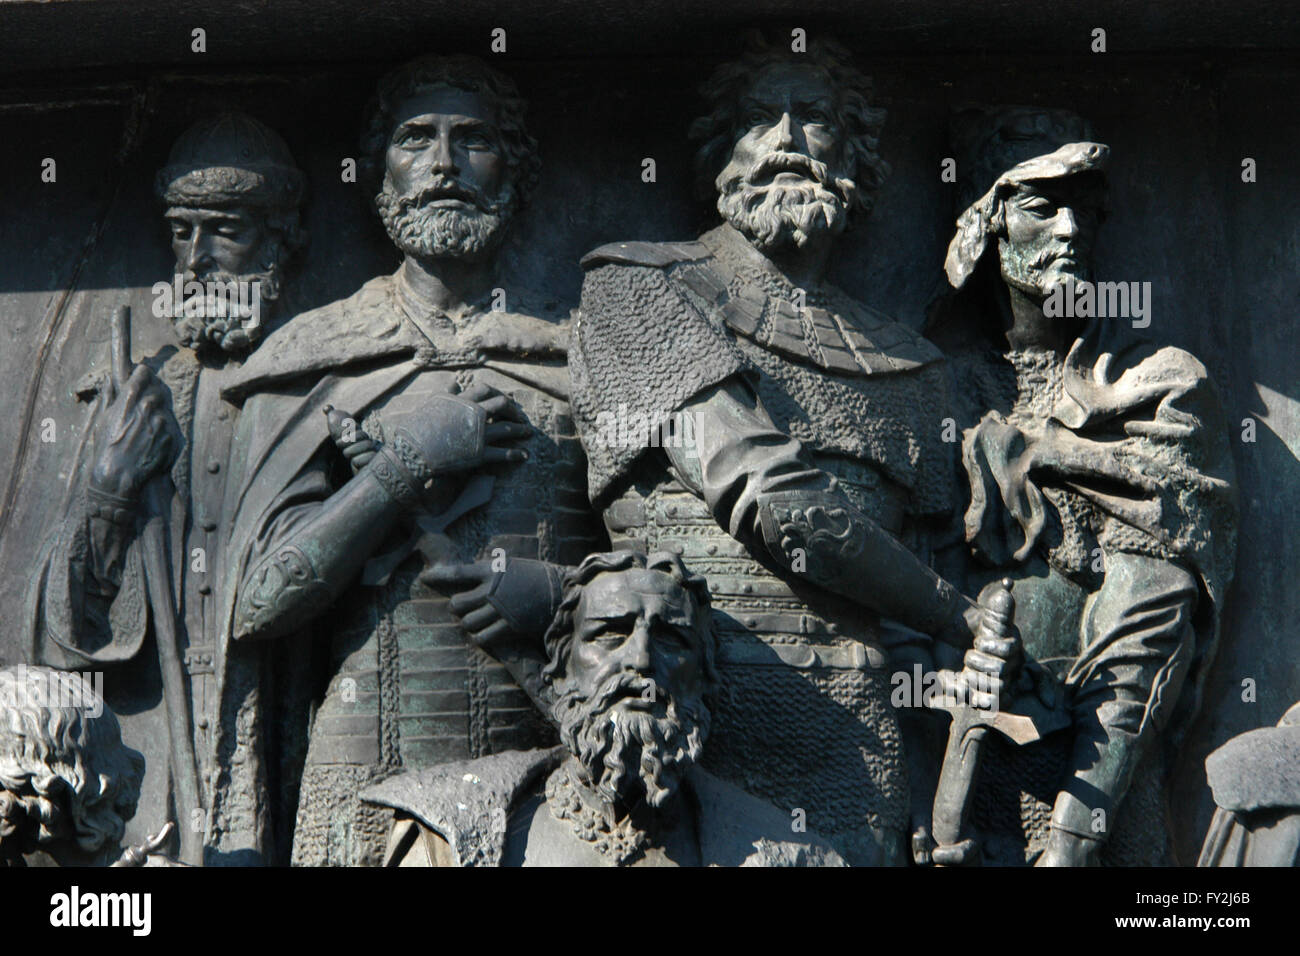 Prince Daumantas of Pskov, Grand Prince Alexander Nevsky of Kiev, Grand Prince Dmitry Donskoy of Moscow and Grand Duke Kestutis of Lithuania depicted (from left to right) in the bas relief dedicated to Russian military leaders and heroes by Russian sculptors Matvey Chizhov and Alexander Lubimov. Detail of the Monument to the Millennium of Russia (1862) designed by Mikhail Mikeshin in Veliky Novgorod, Russia. Prince Michael of Tver is depicted bellow. Stock Photo